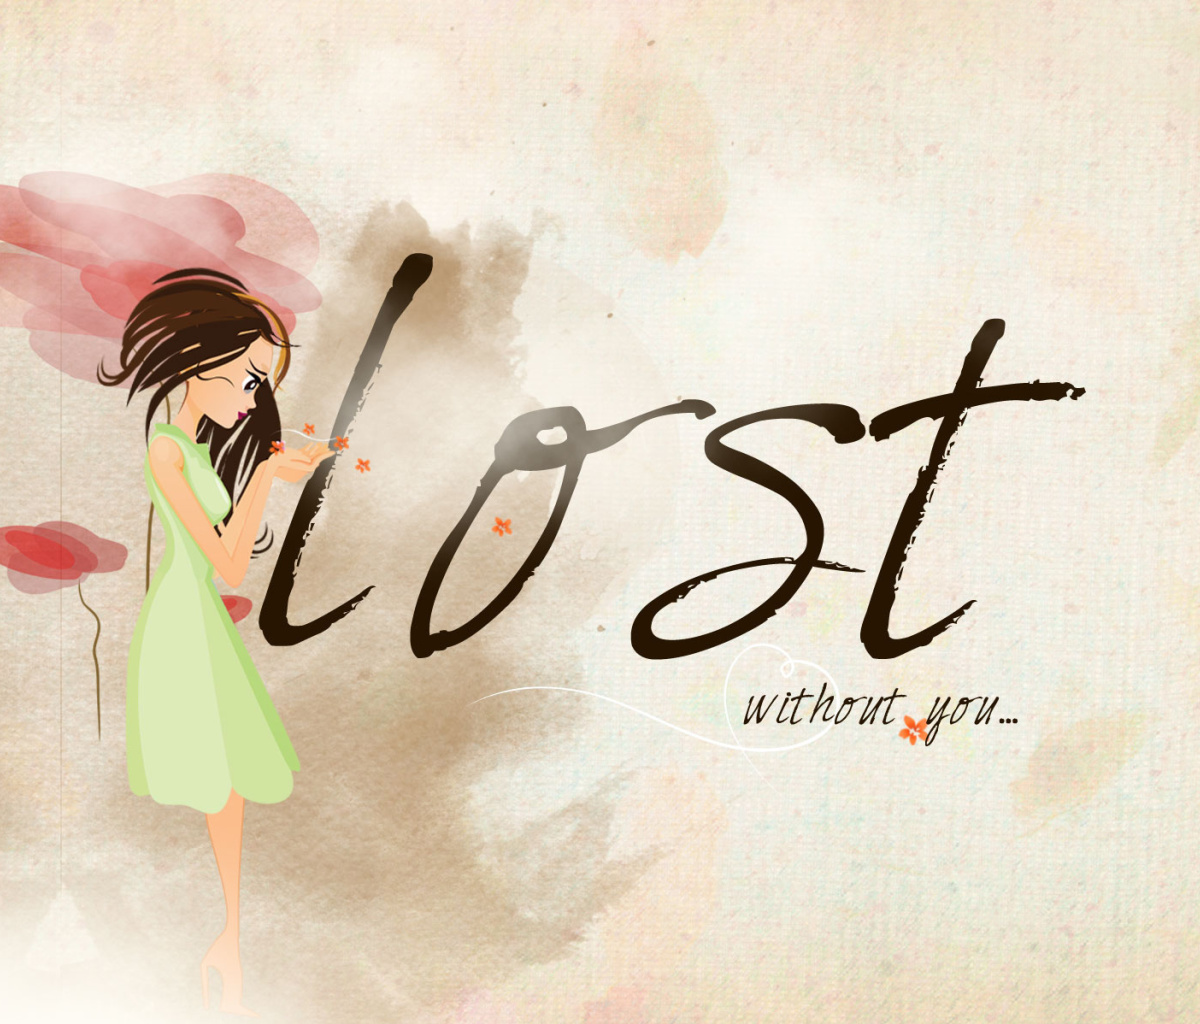 Das Lost Without You Wallpaper 1200x1024